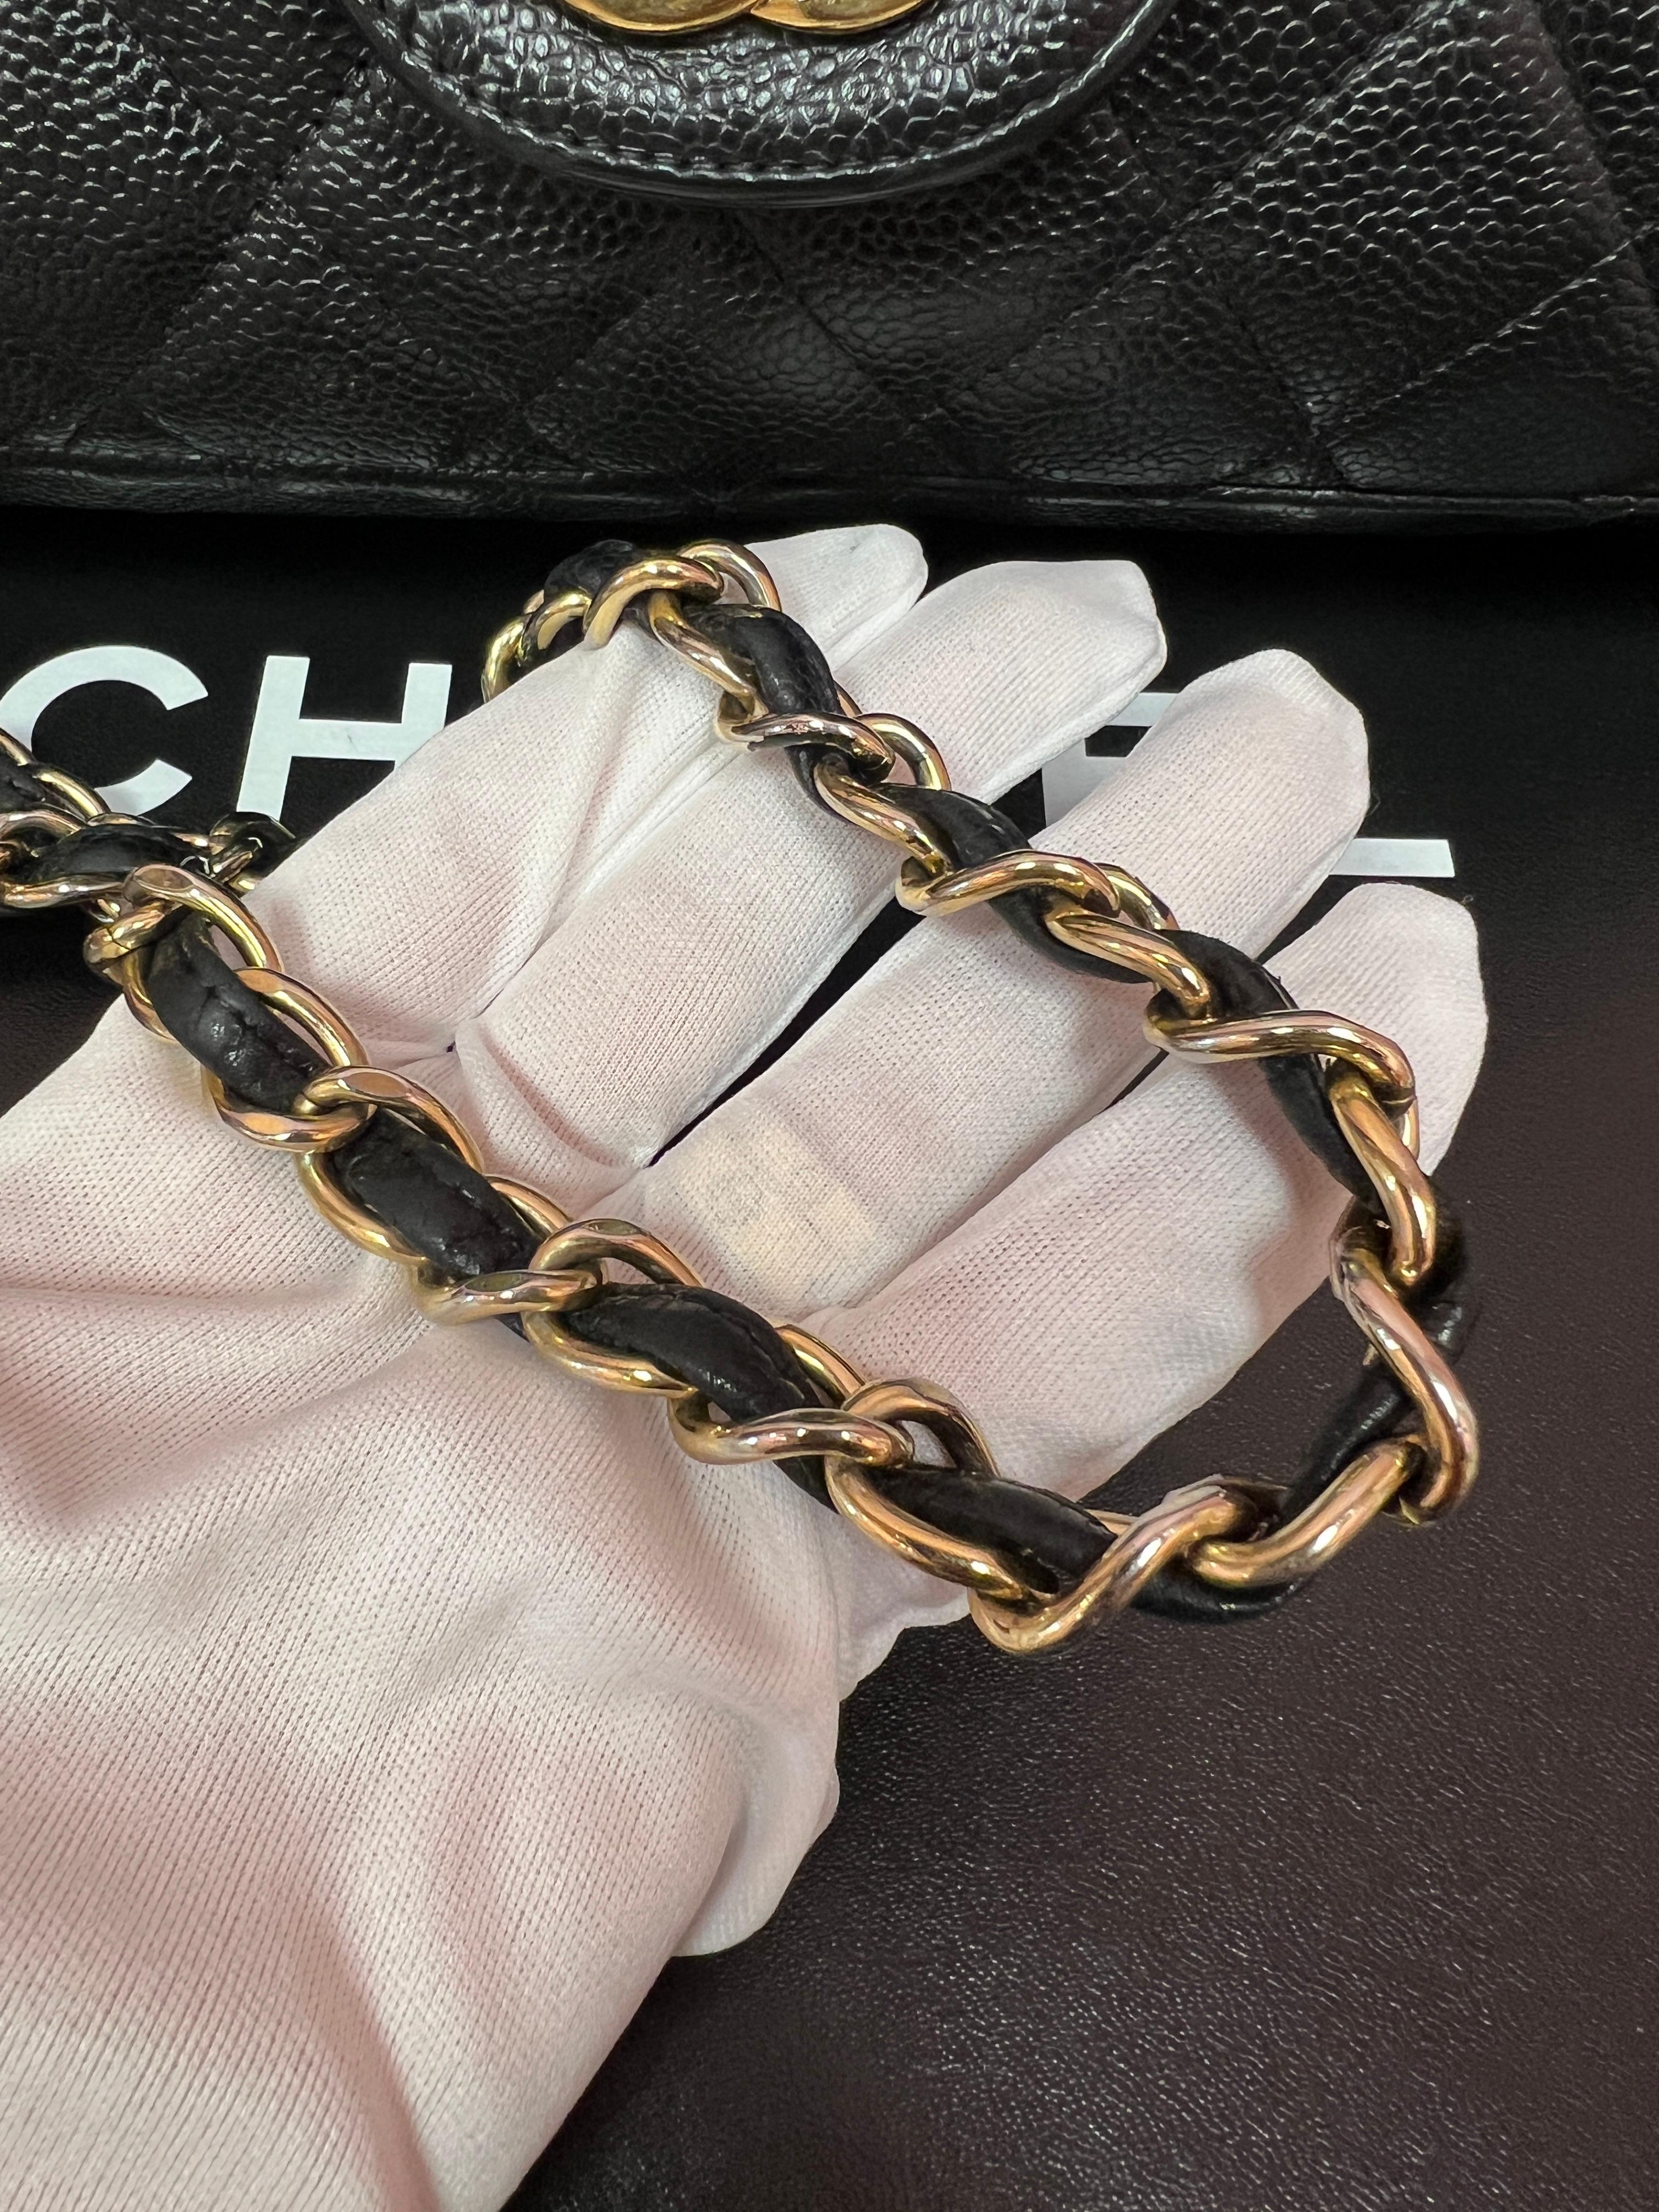 Chanel Vintage Black Caviar Jumbo Flap Bag  In Good Condition For Sale In Thousand Oaks, CA